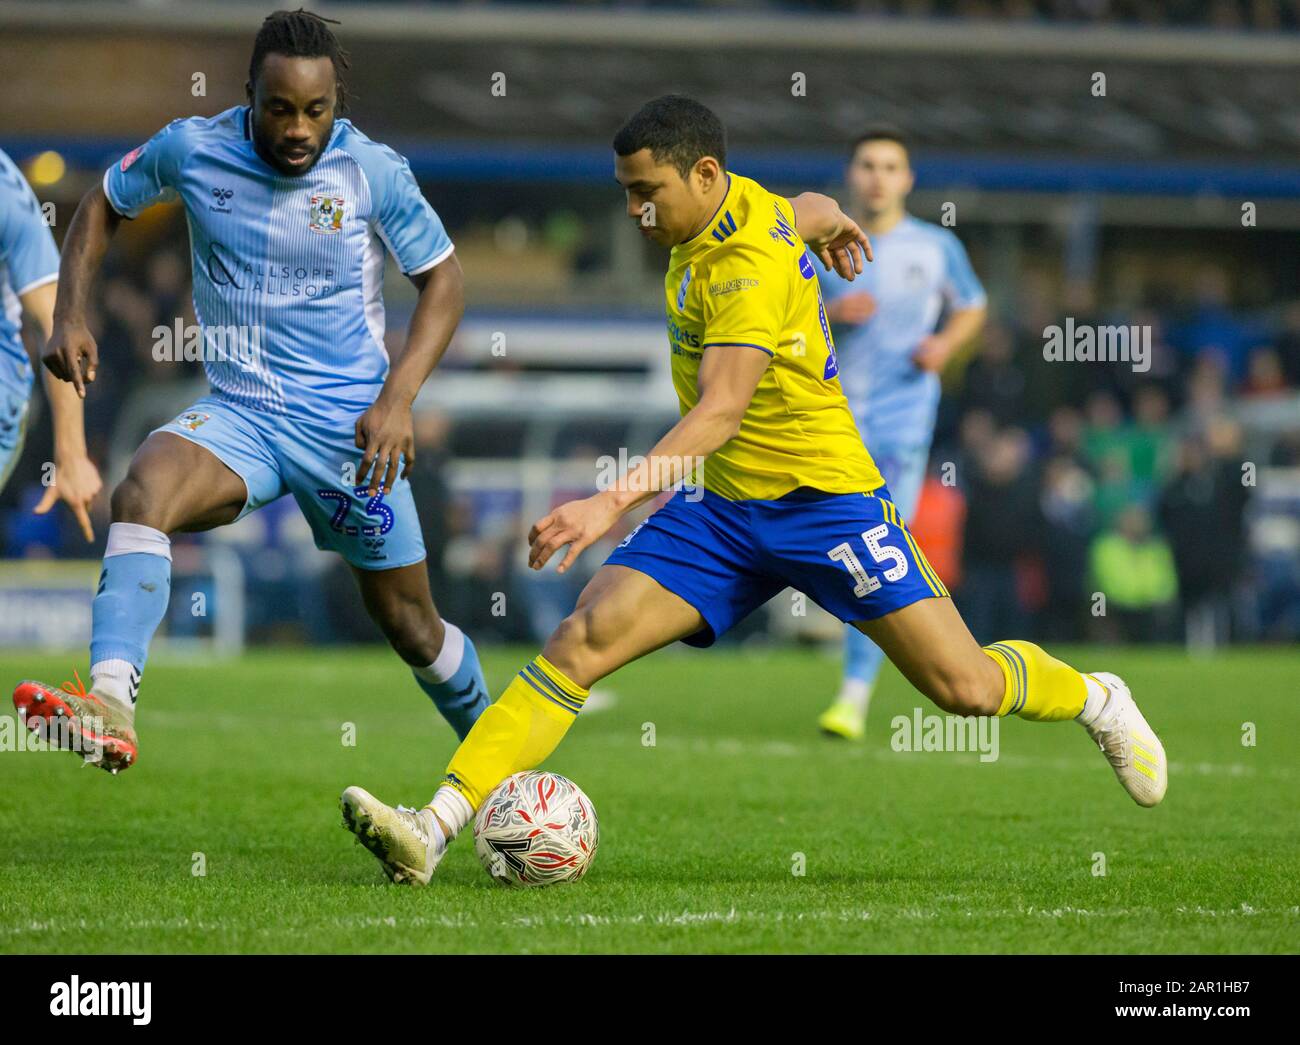 25th January 2020; St Andrews Stadium, Coventry, West Midlands, England; English FA Cup Football, Coventry City v Birmingham City; Jefferson Montero of Birmingham City stretches to cover the ball at his feet as Fankaty Dabo of Coventry City comes in to tackle - Strictly Editorial Use Only. No use with unauthorized audio, video, data, fixture lists, club/league logos or 'live' services. Online in-match use limited to 120 images, no video emulation. No use in betting, games or single club/league/player publications Stock Photo